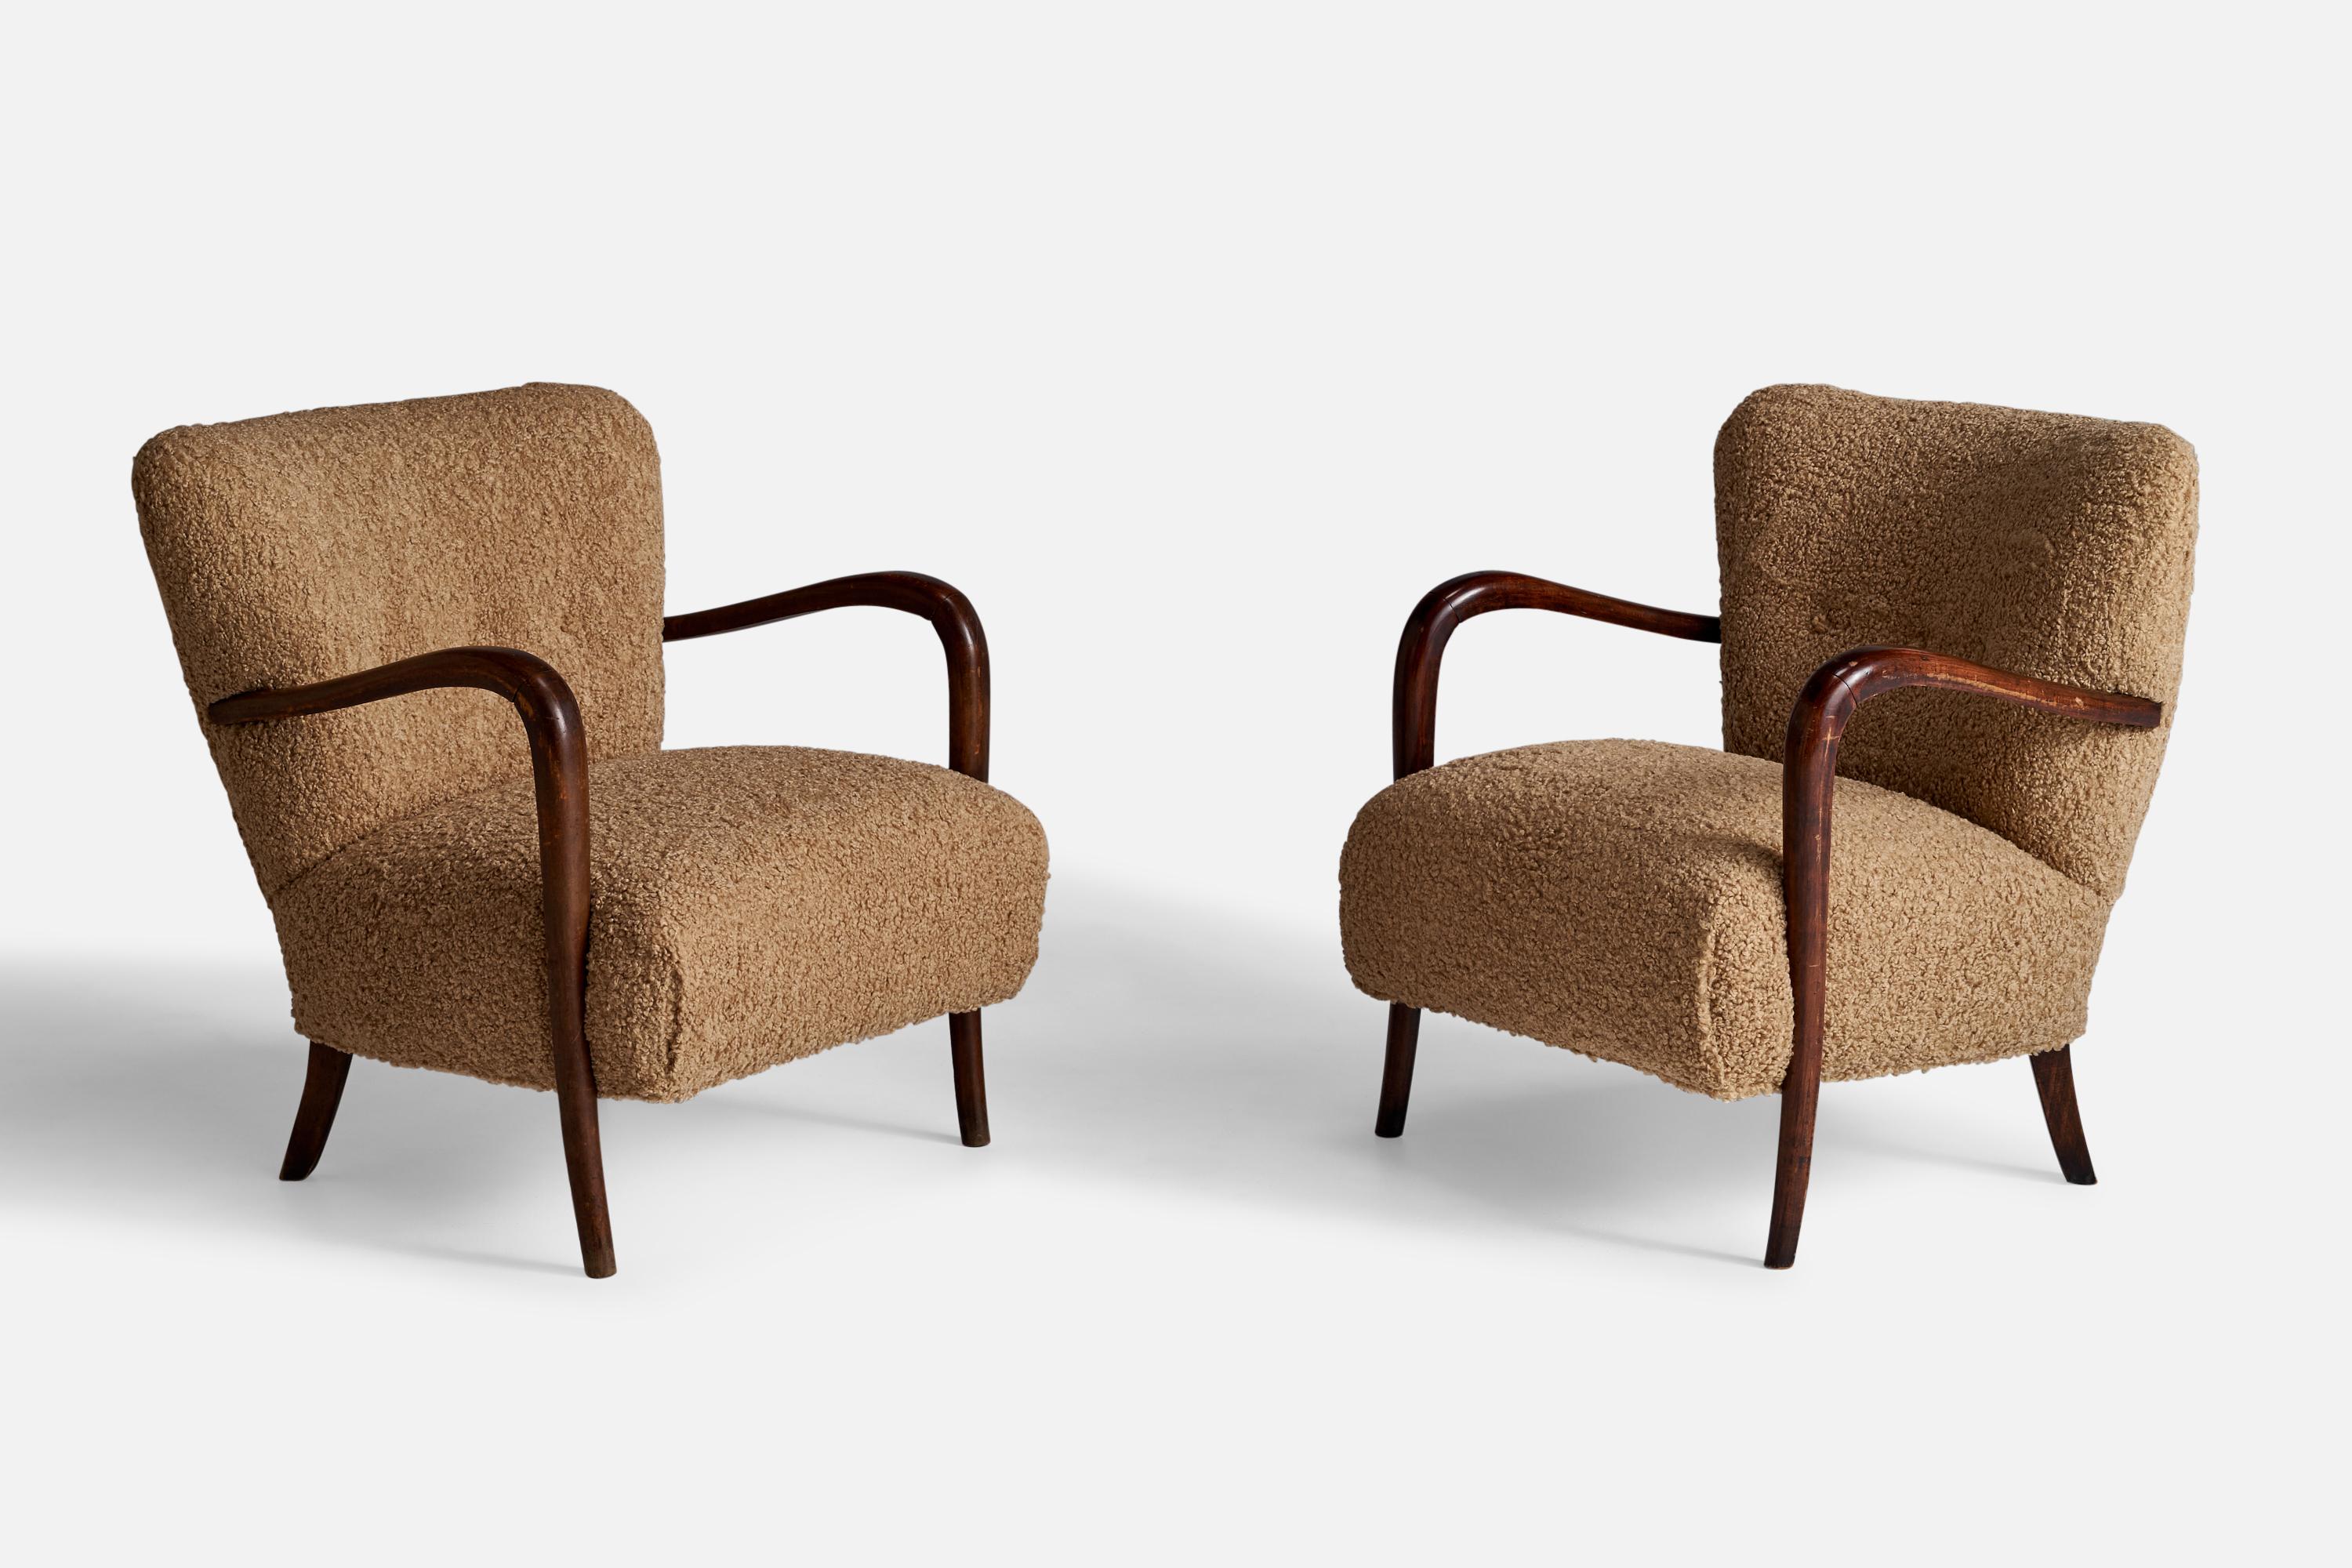 A pair of dark-stained wood and beige bouclé fabric lounge chairs designed and produced in Italy, 1940s.

Seat height: 15.5”